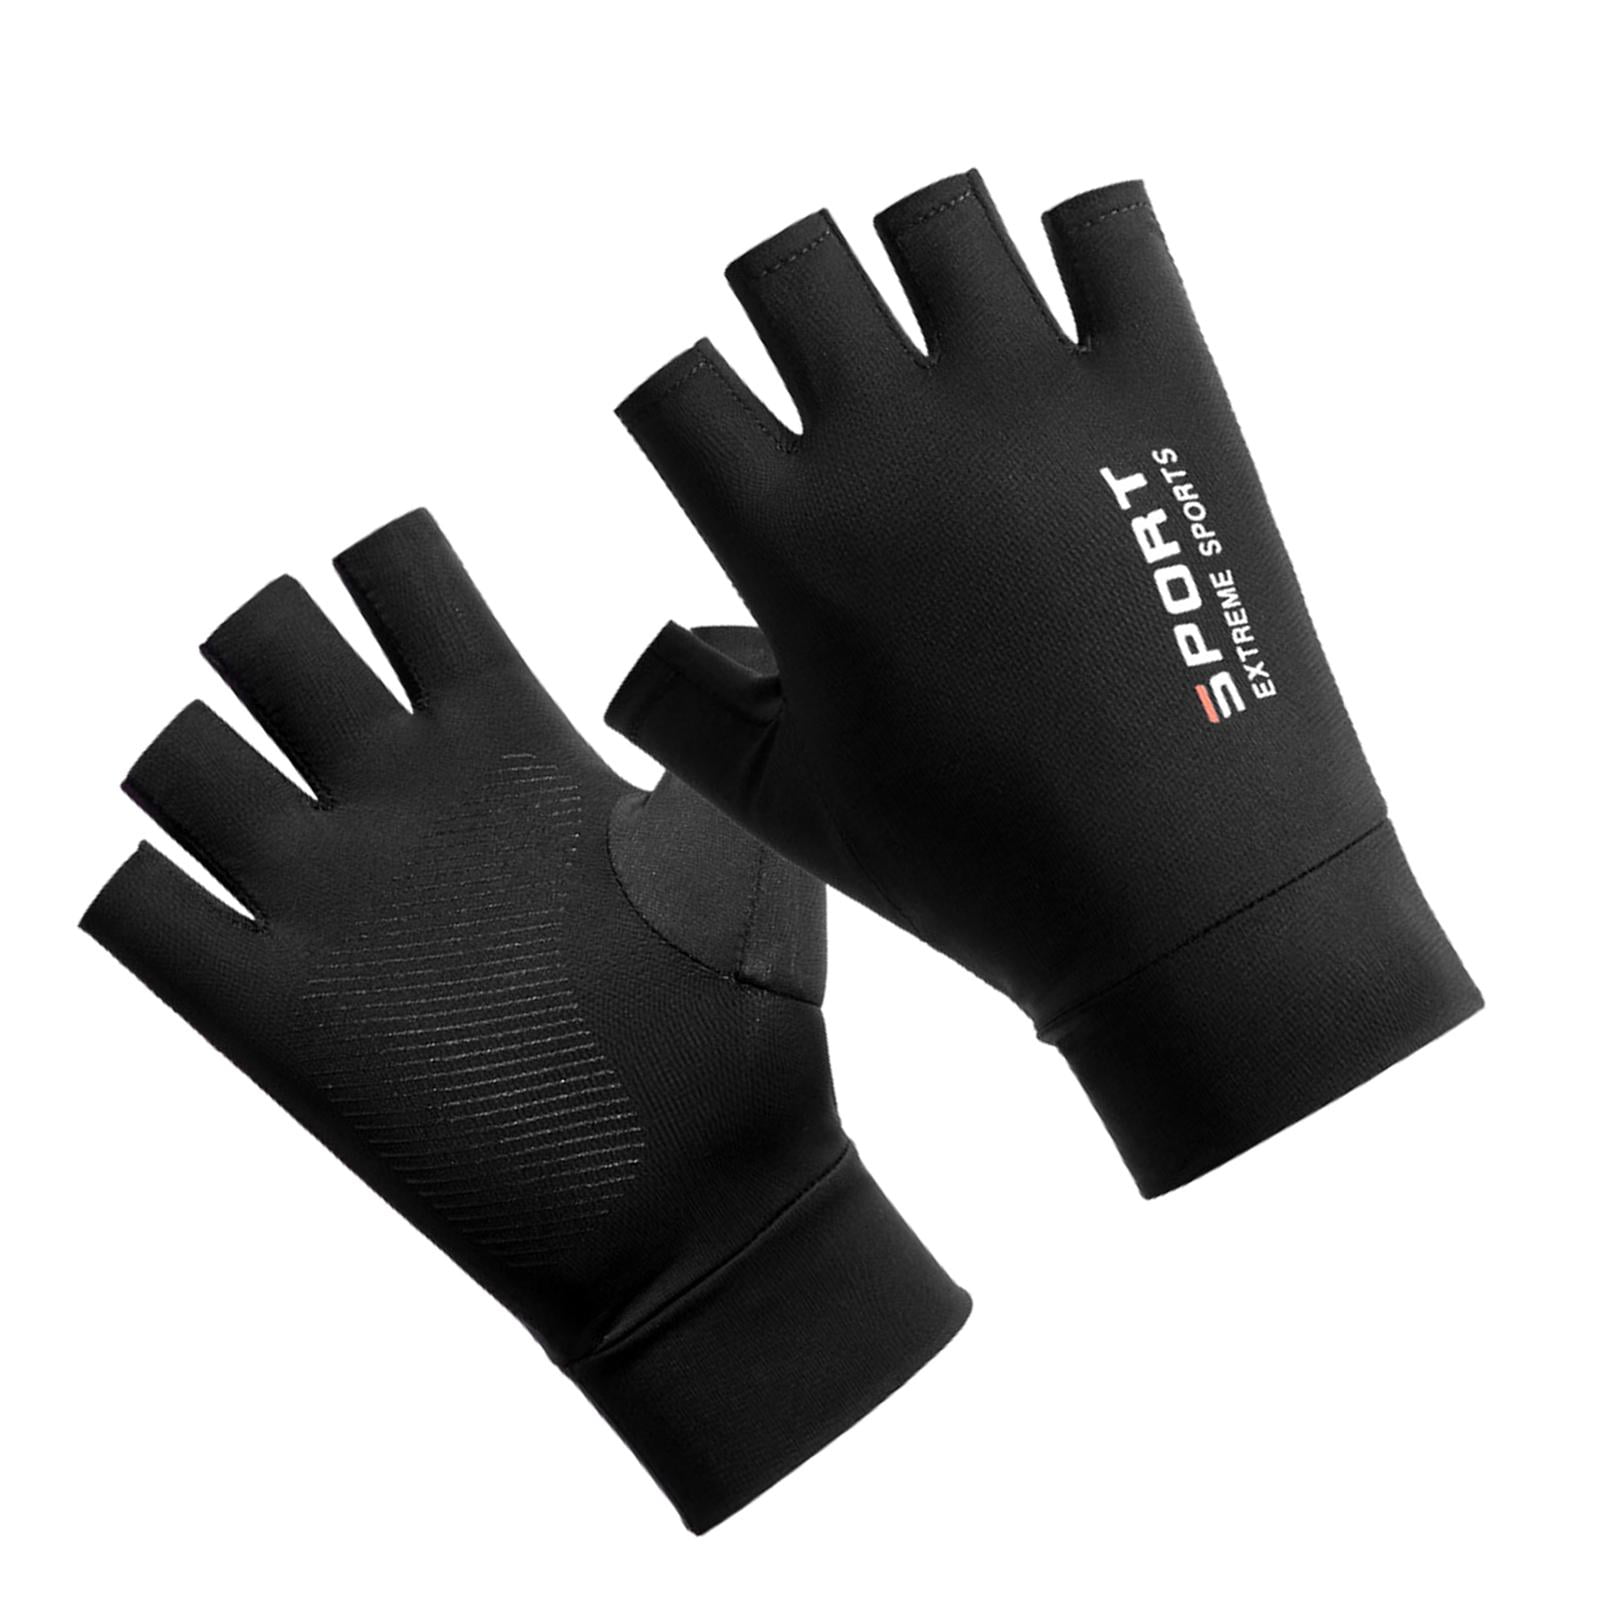 Cycling Gloves Sunscreen Summer Fishing Sweat-absorbent Breathable Thin Gloves 